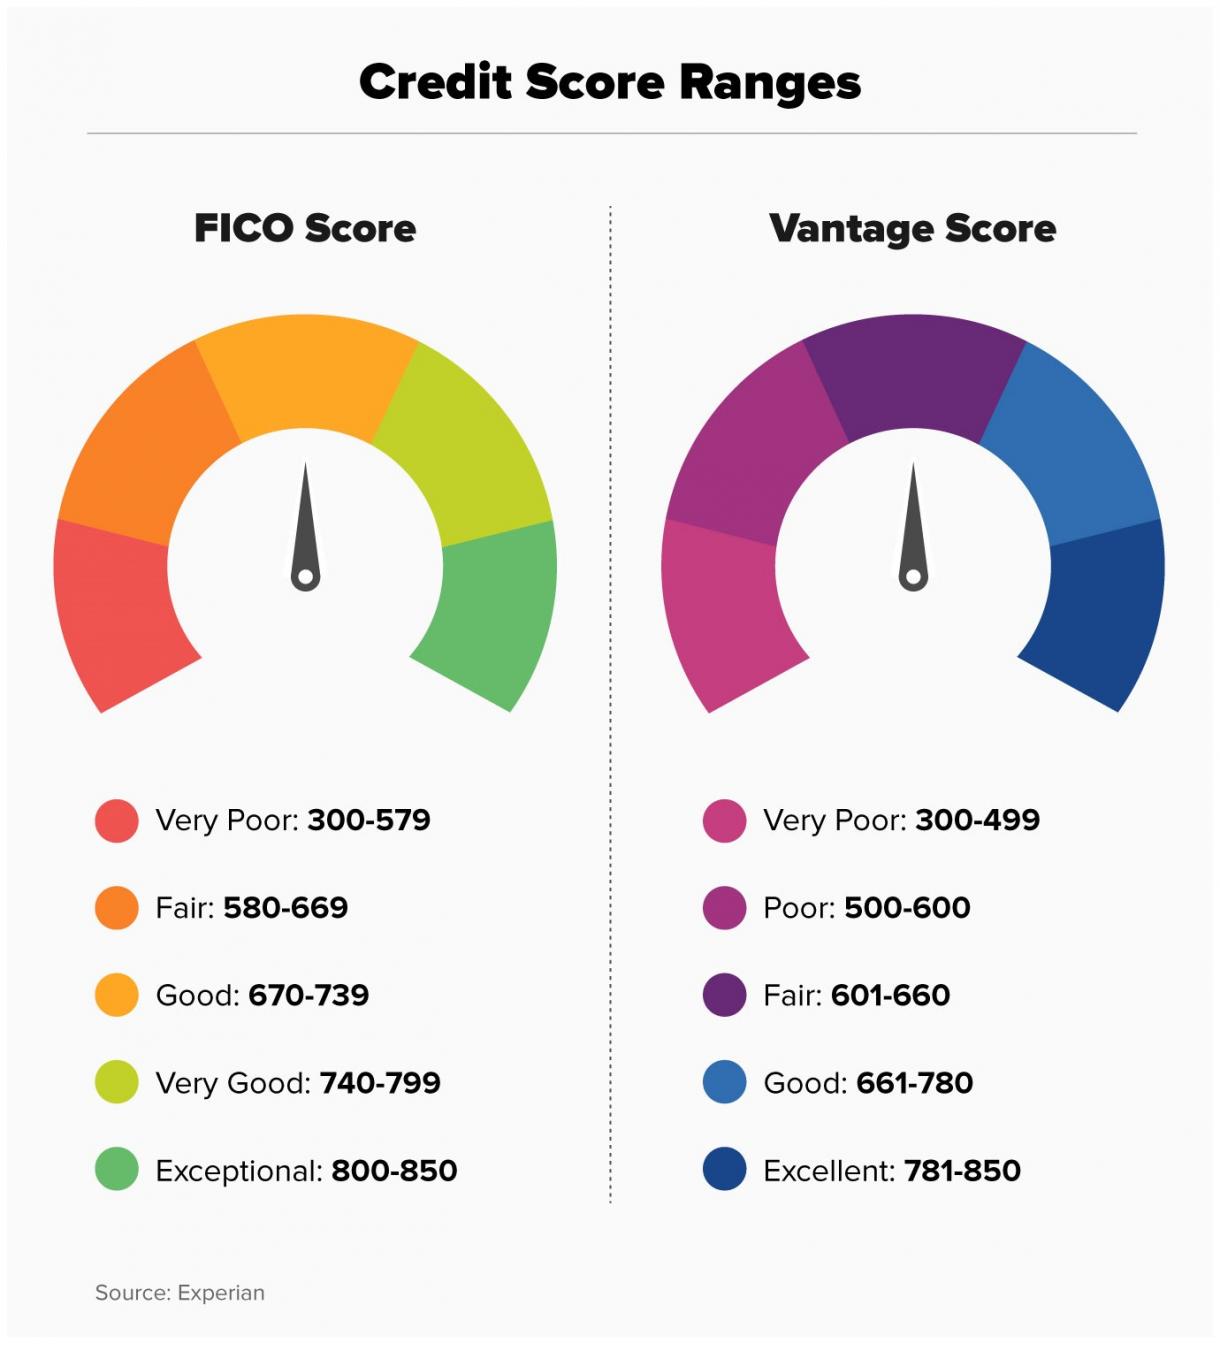 Chart comparing FICO Scores and Vantage Scores